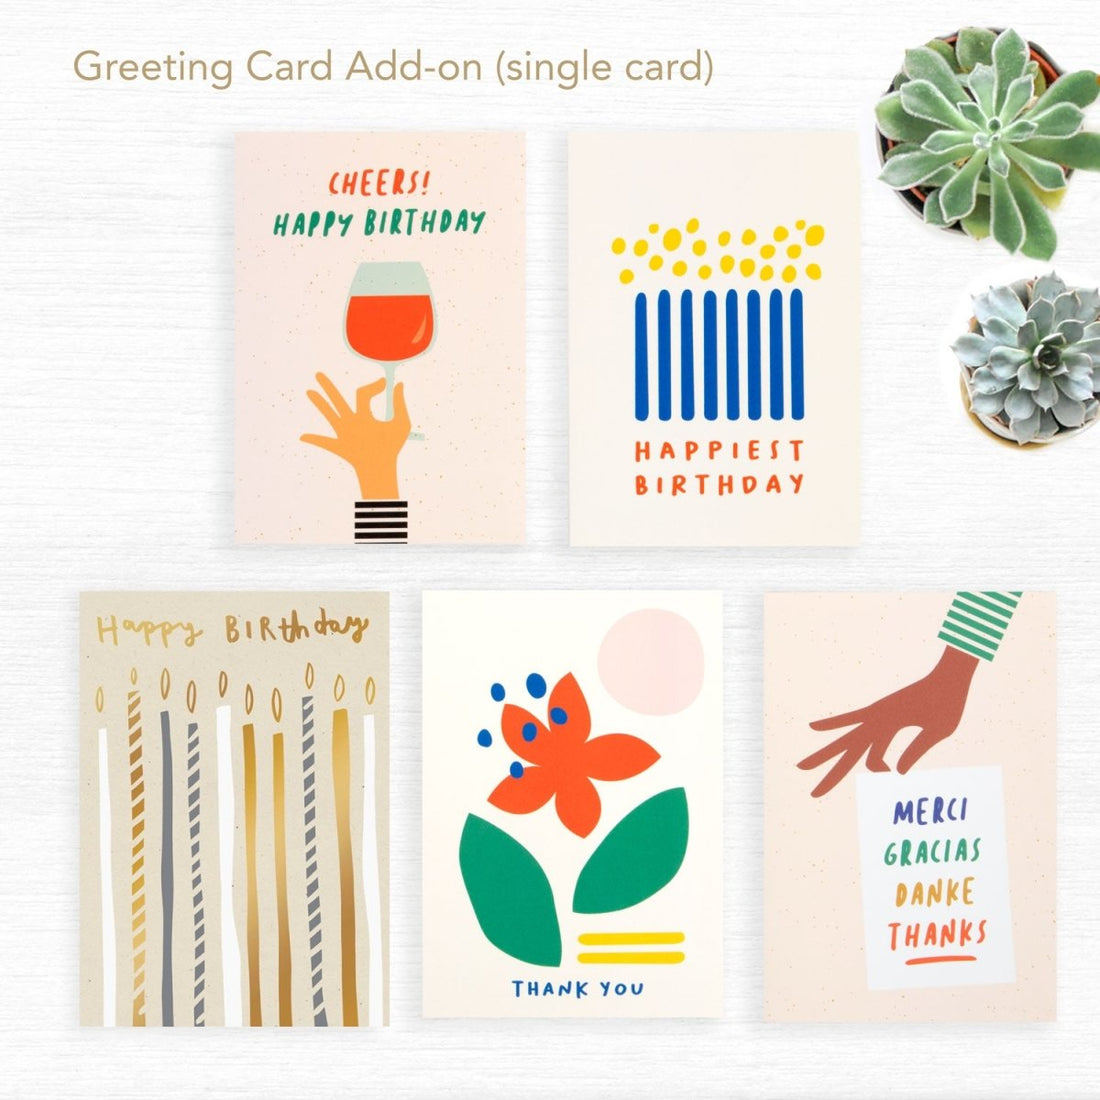 greeting cards: cheers, happy birthday, thank you & more